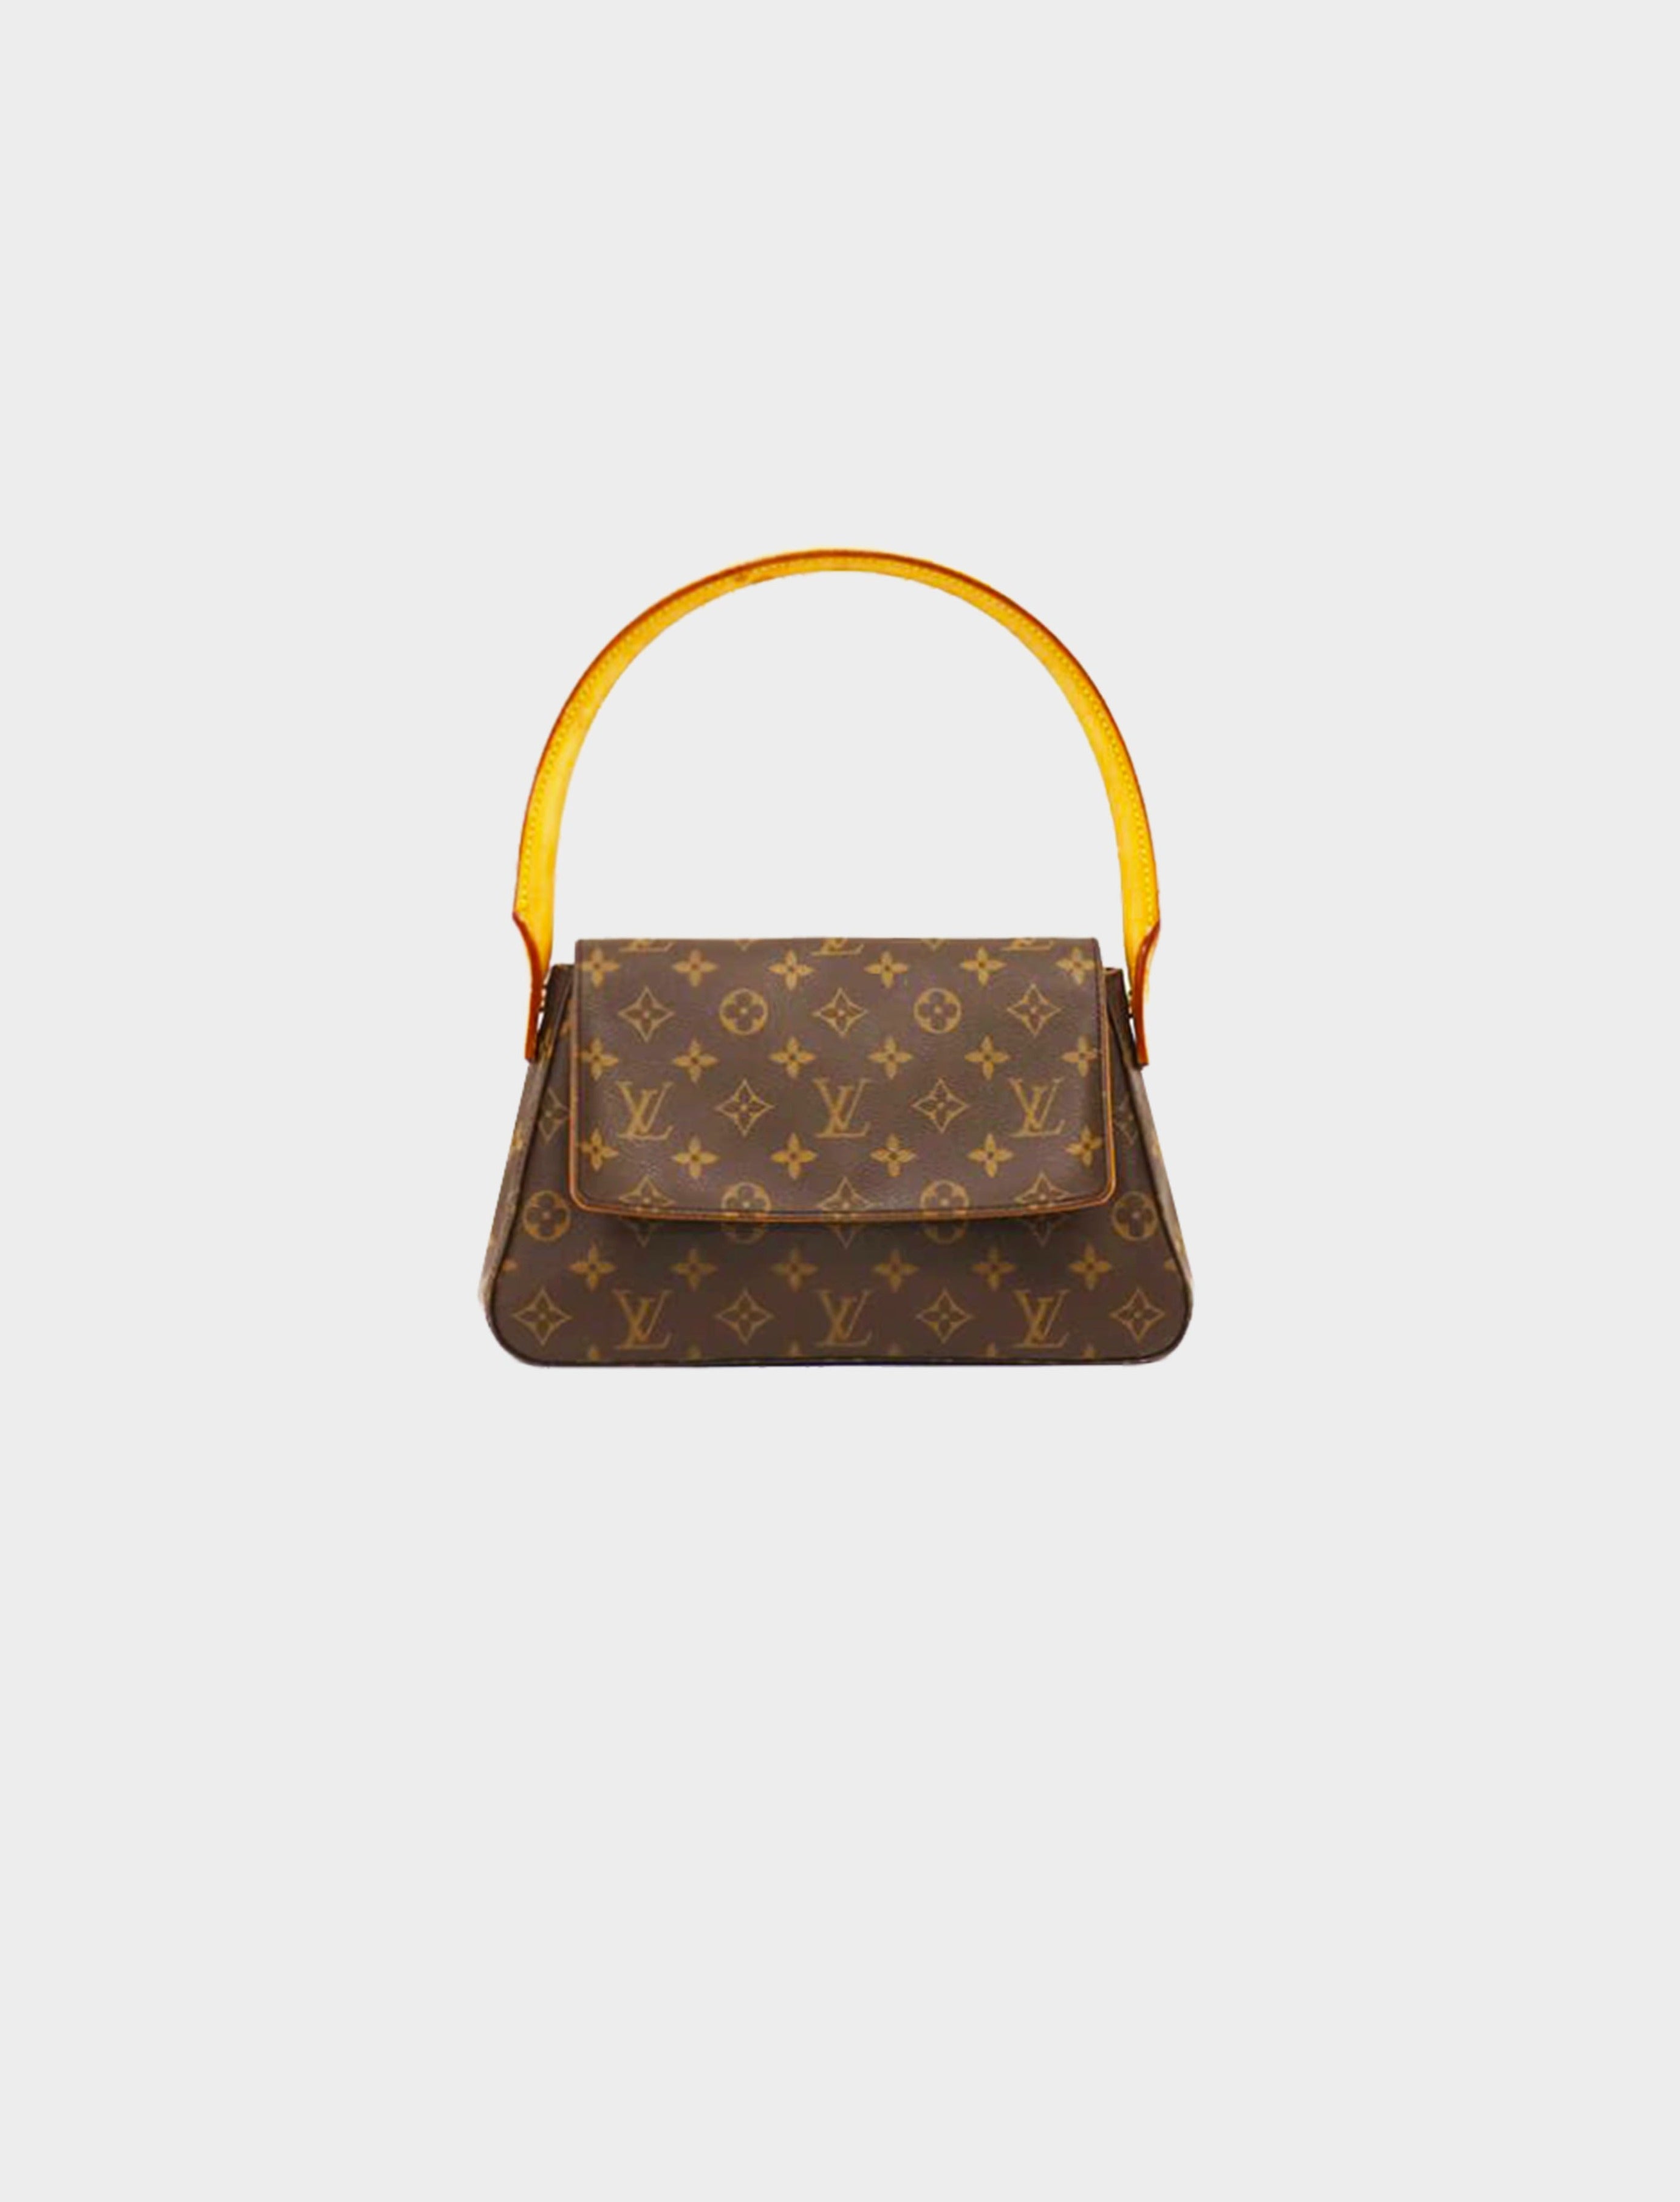 2010s Louis Vuitton Patent Leather Yellow And Black Polka Dots Bag